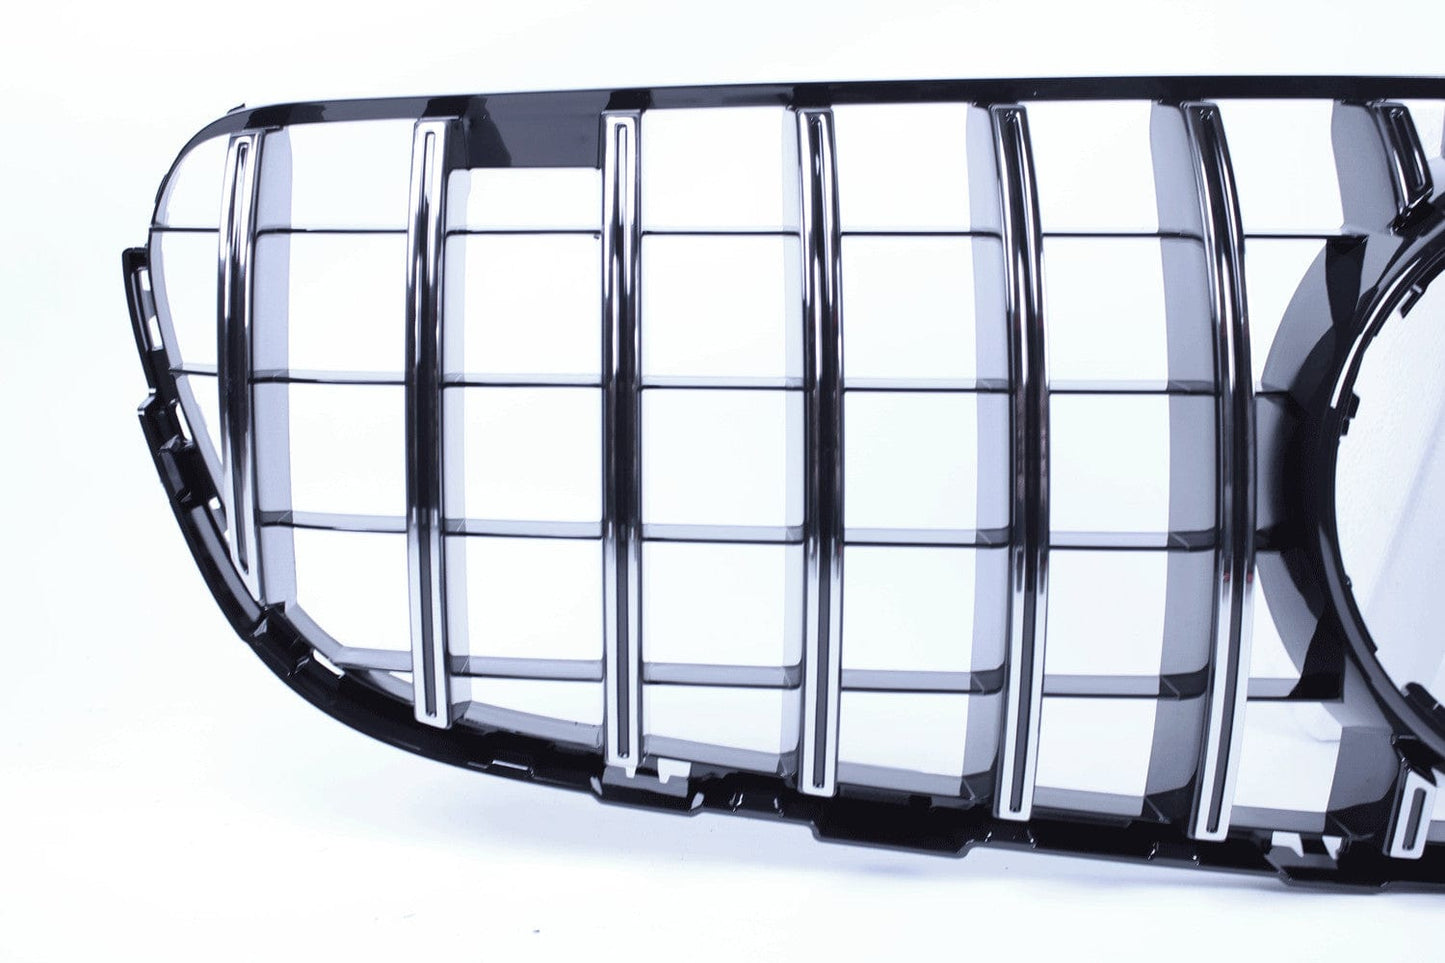 Grill compatible with Mercedes-Benz GLC - GLC Coupe chrome